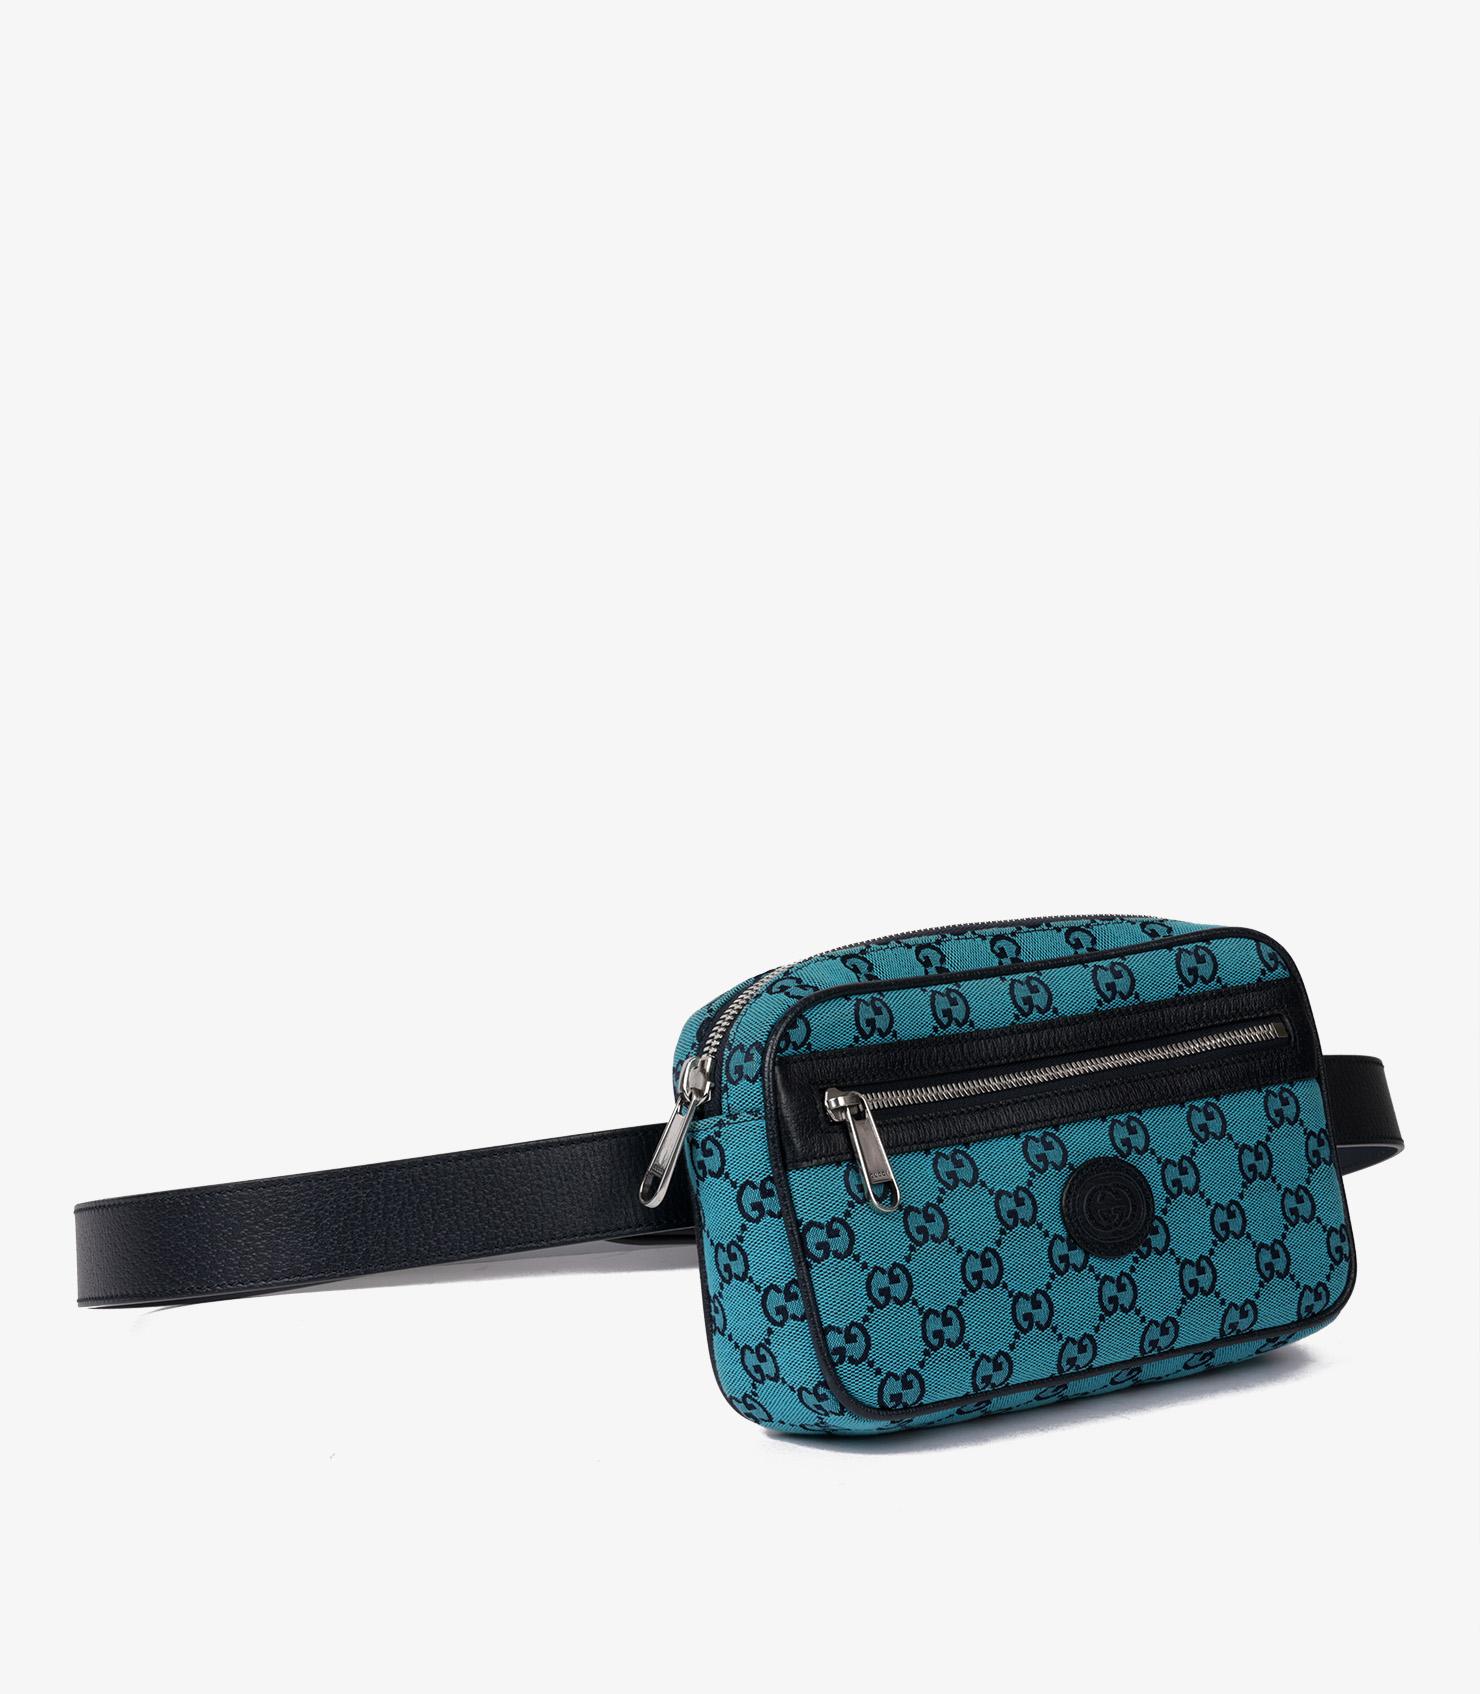 Gucci Blue Monogram Canvas & Navy Calfskin Leather GG Belt Bag

Brand- Gucci
Model- GG Belt Bag
Product Type- Belt Bag
Serial Number- 6.*********
Age- Circa 2023
Accompanied By- Gucci Dust Bag
Colour- Blue
Hardware- Silver
Material(s)- Canvas,